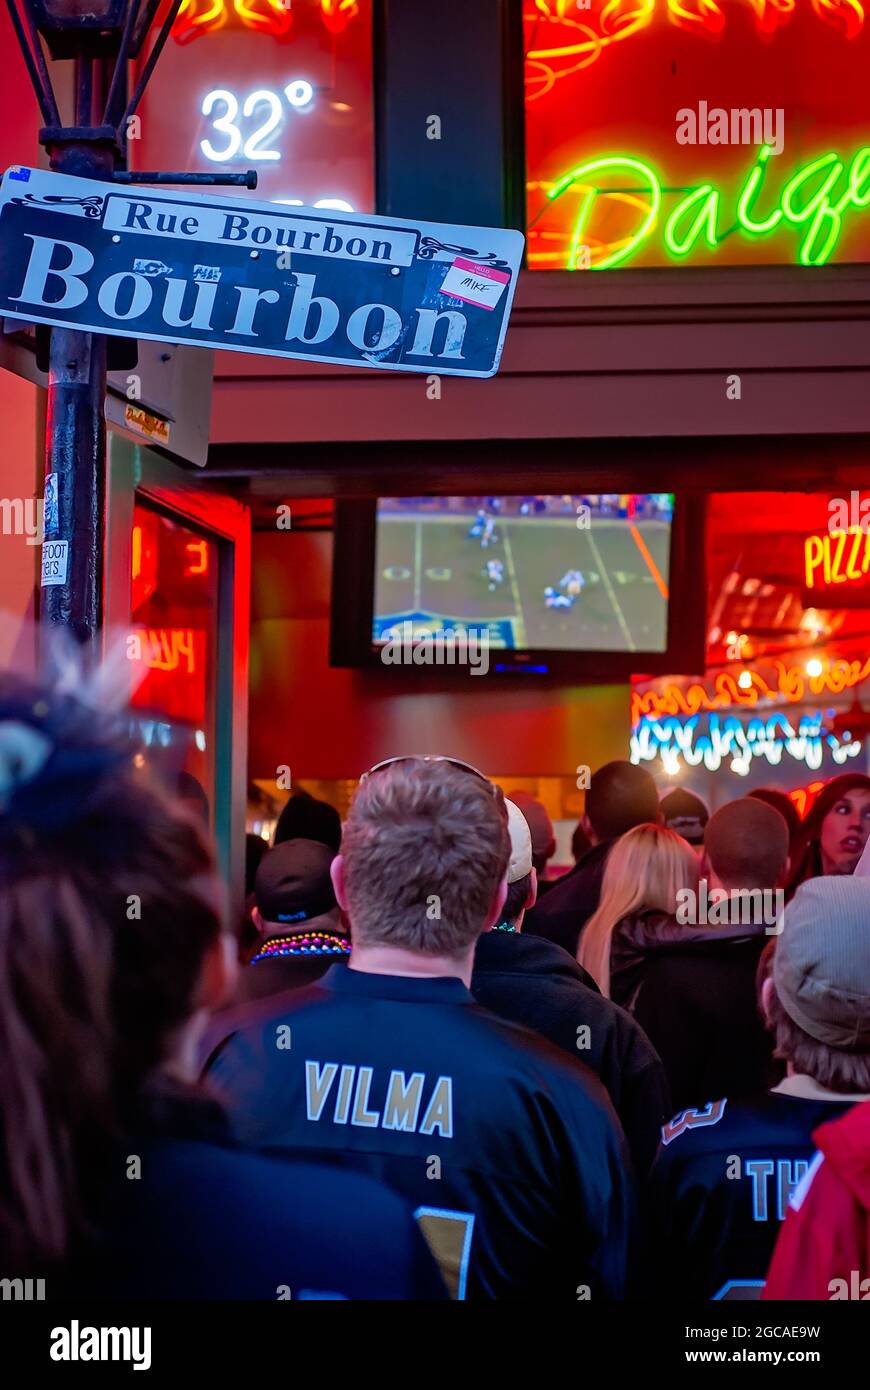 New Orleans Saints fans gather at Big Easy Daiquiris to watch the New Orleans Saints play in the Super Bowl, Feb. 7, 2010, in New Orleans, Louisiana. Stock Photo